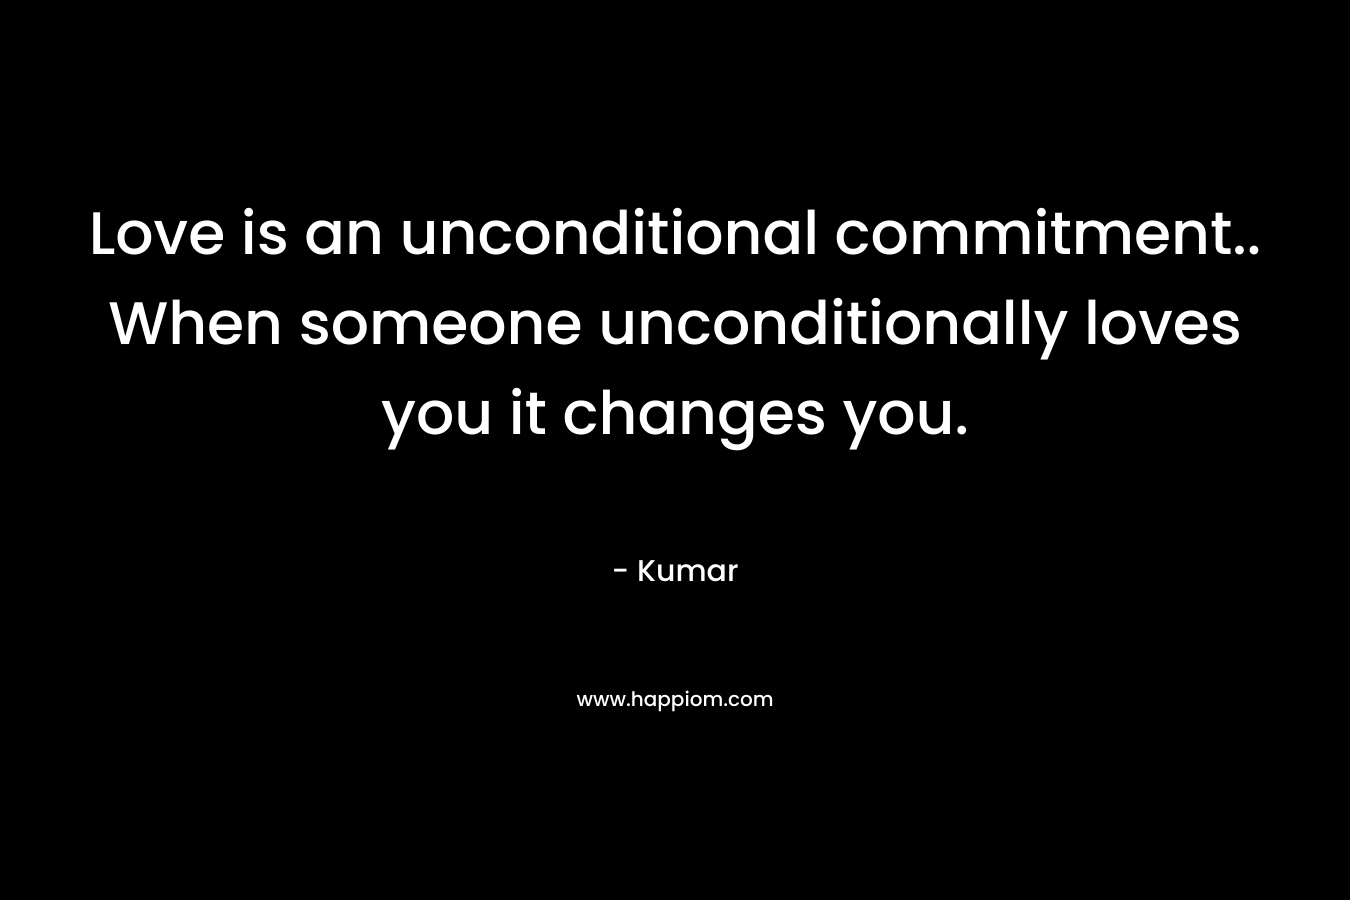 Love is an unconditional commitment.. When someone unconditionally loves you it changes you. – Kumar